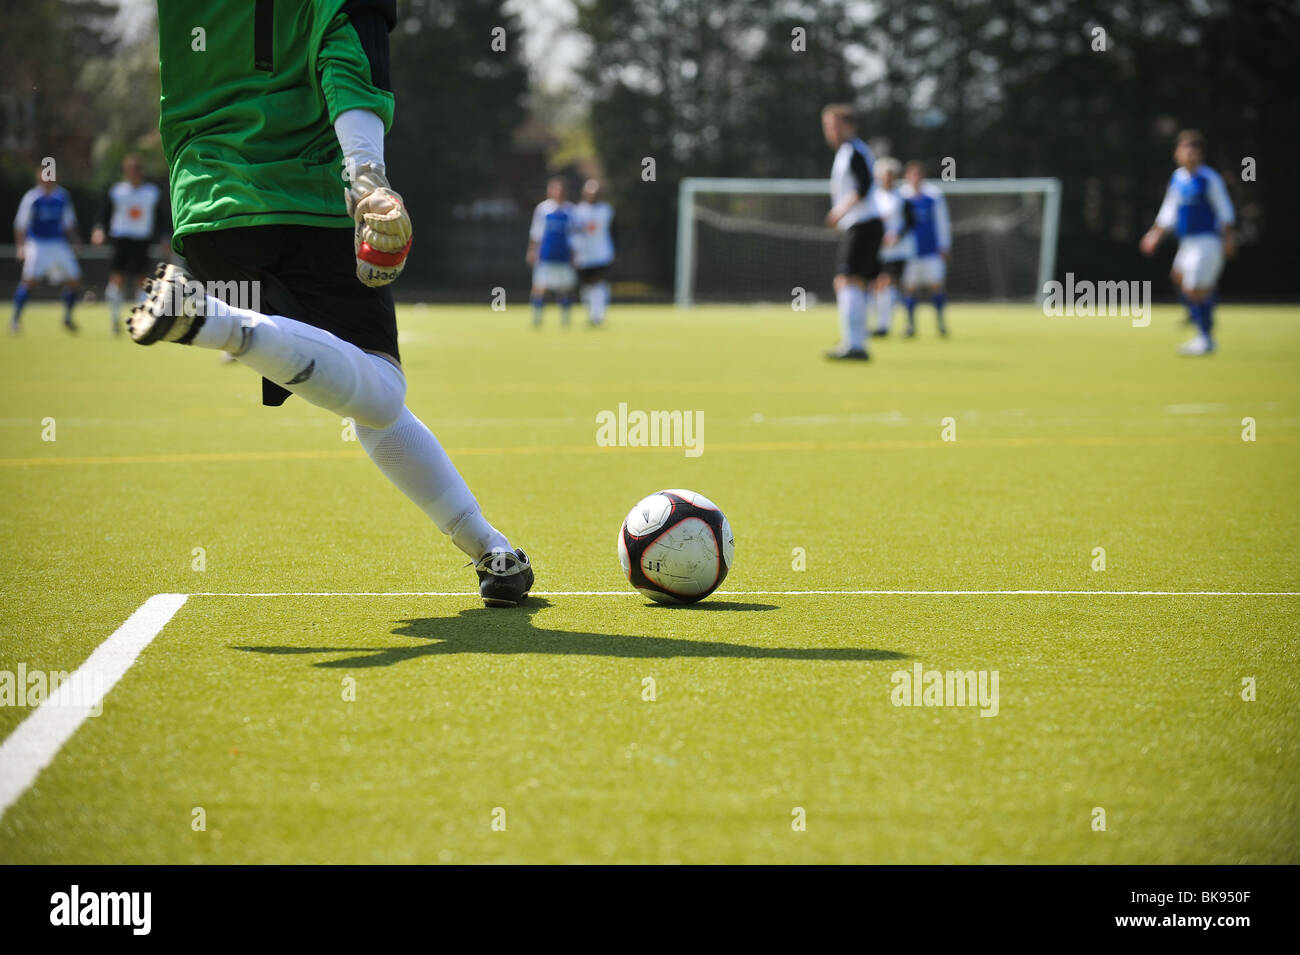 A Goalkeeper clears a football up field during a English amateur Football/Soccer game as the sun beats down. Stock Photo